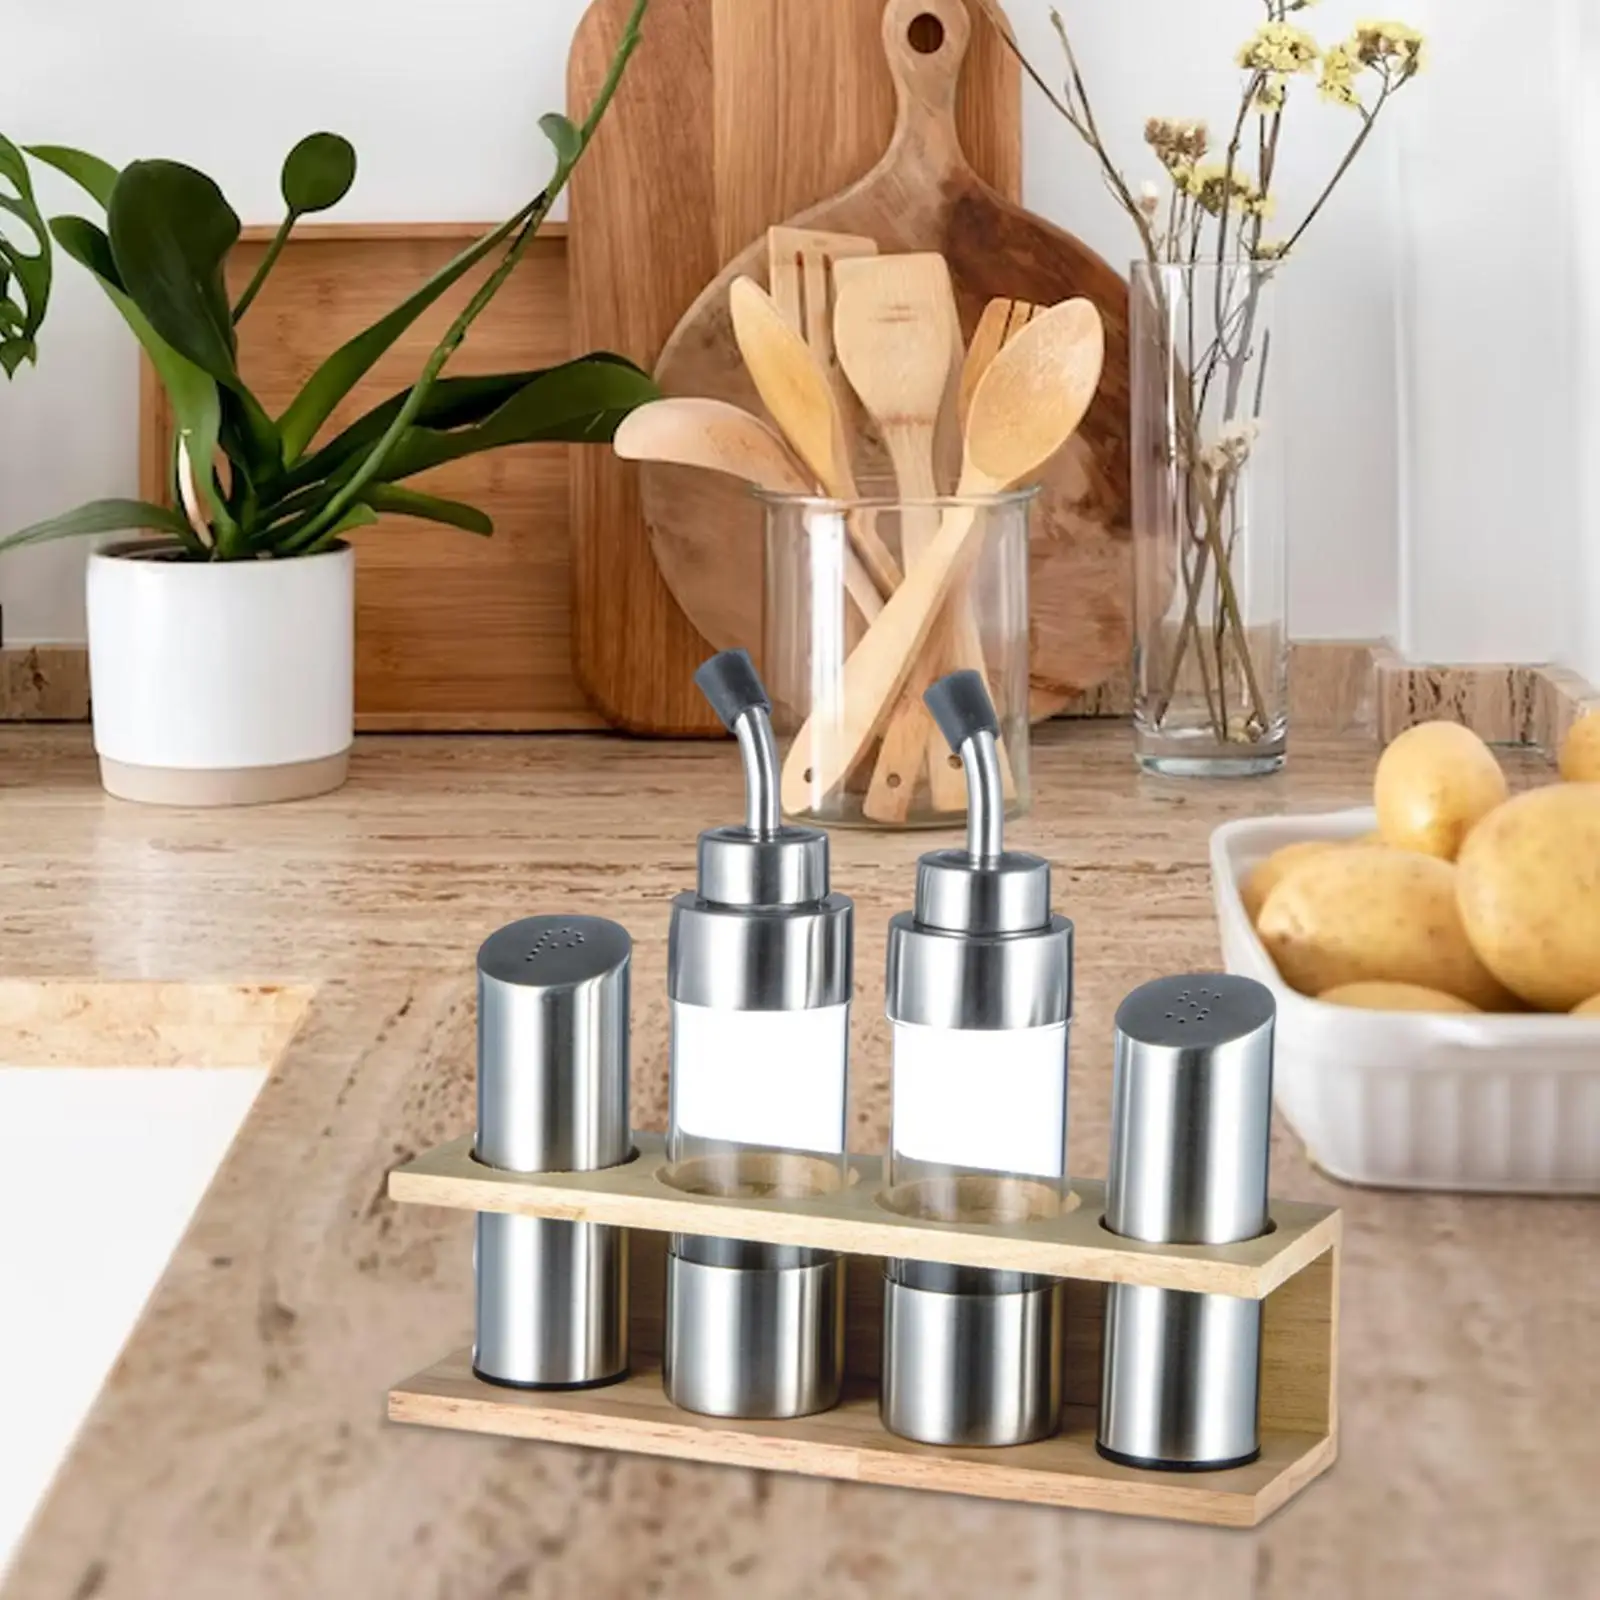 Oil Bottle Seasoning Jar Set Spice Container Oil Pot with Wooden Base Leakproof Durable for Home Tabletop BBQ Restaurant Kitchen